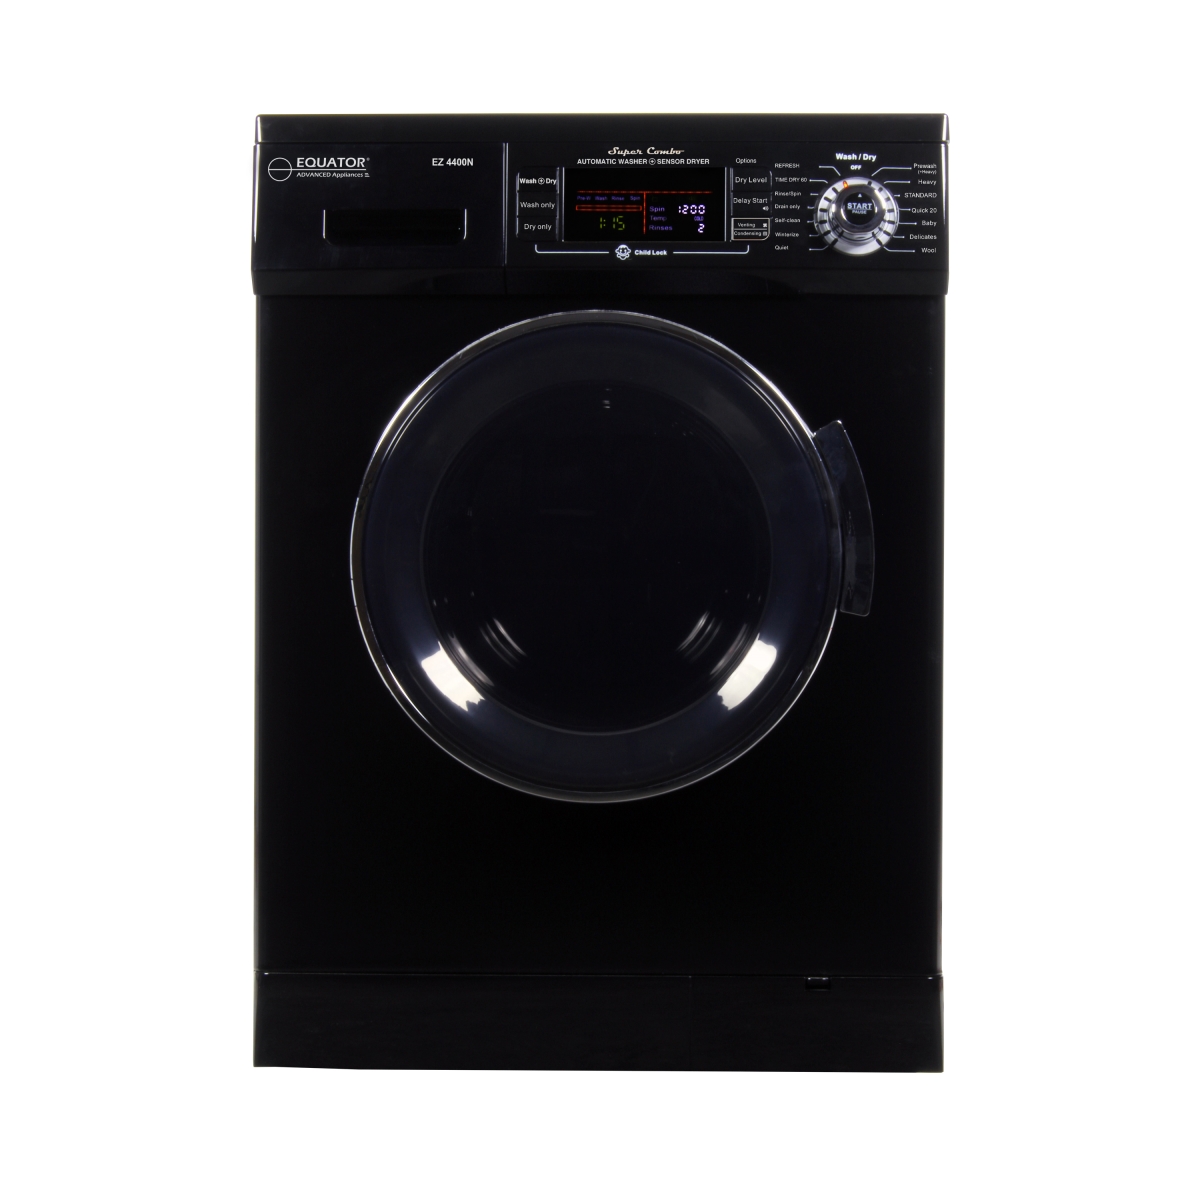 Ez 4400 N Black All-in-one Compact Convertible Combo Washer Dryer With Fully Digital, Black